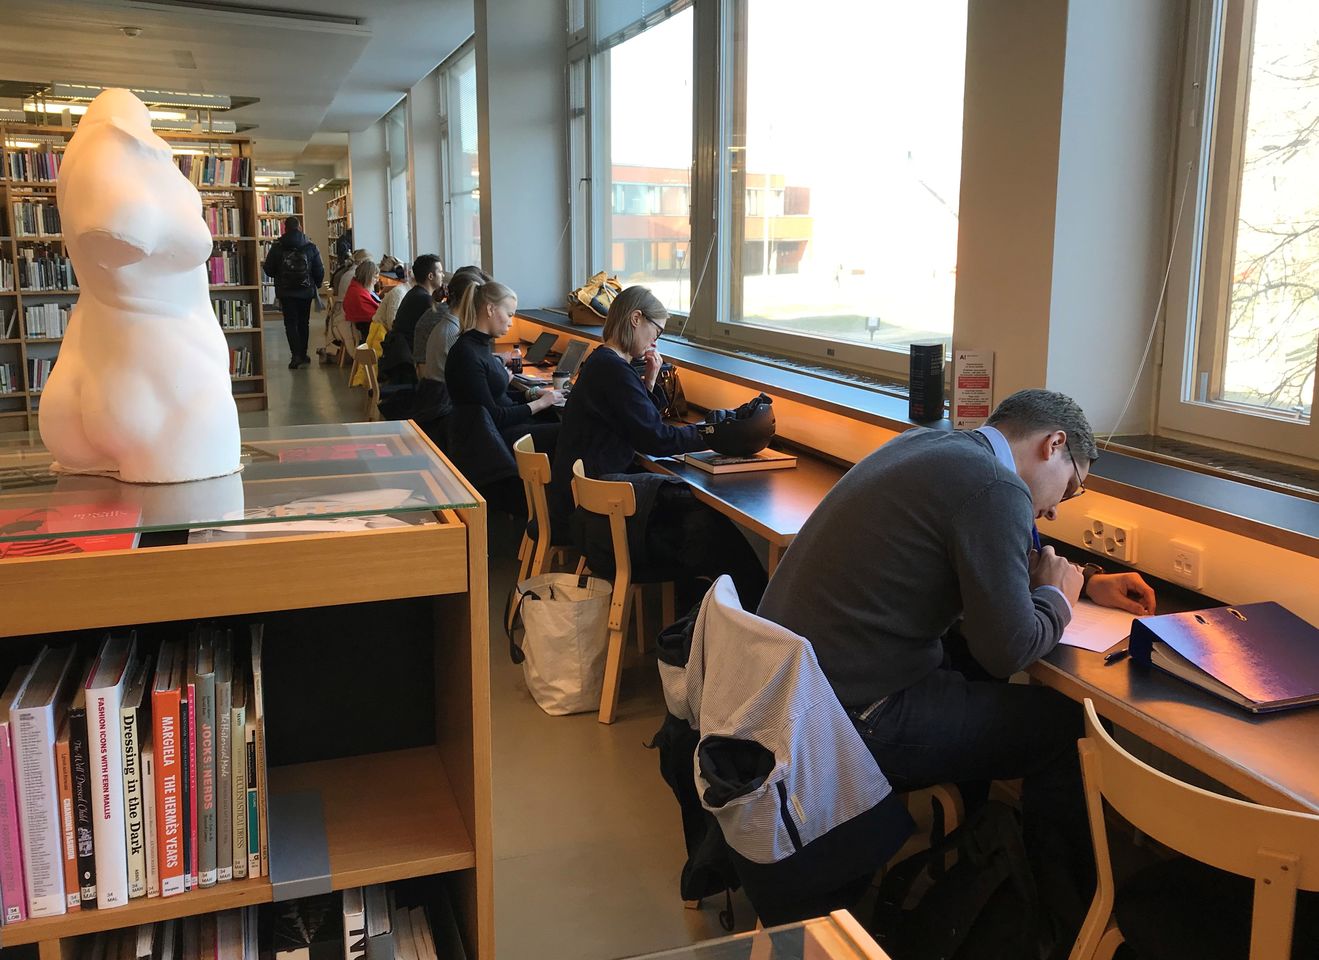 People reading at the 2nd floor of Learning Centre, near the collections of design and art.